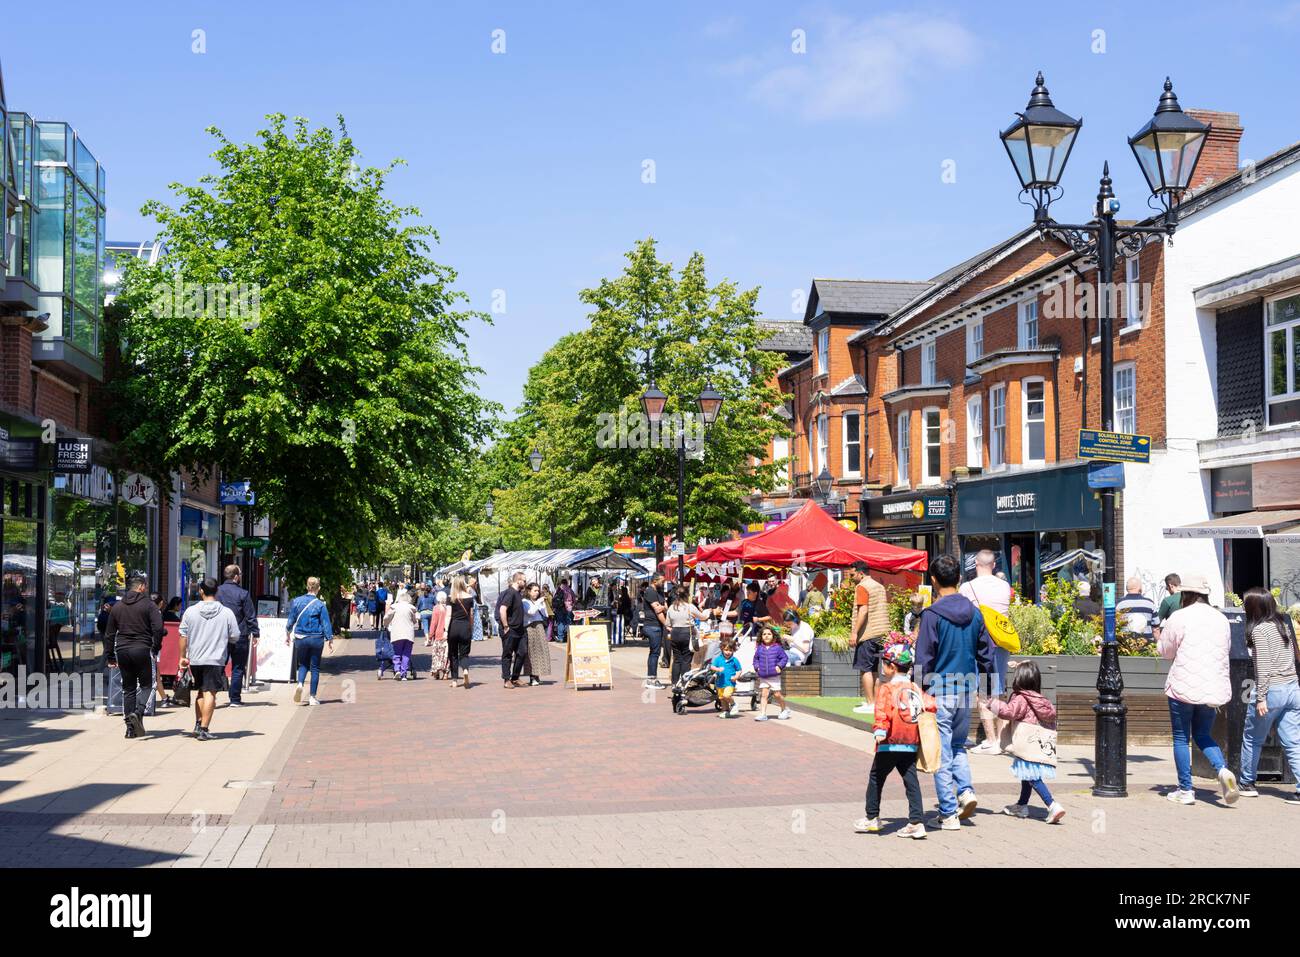 Solihull town centre open air market and shops on the high street in Solihull High street Solihull West Midlands England UK GB Europe Stock Photo